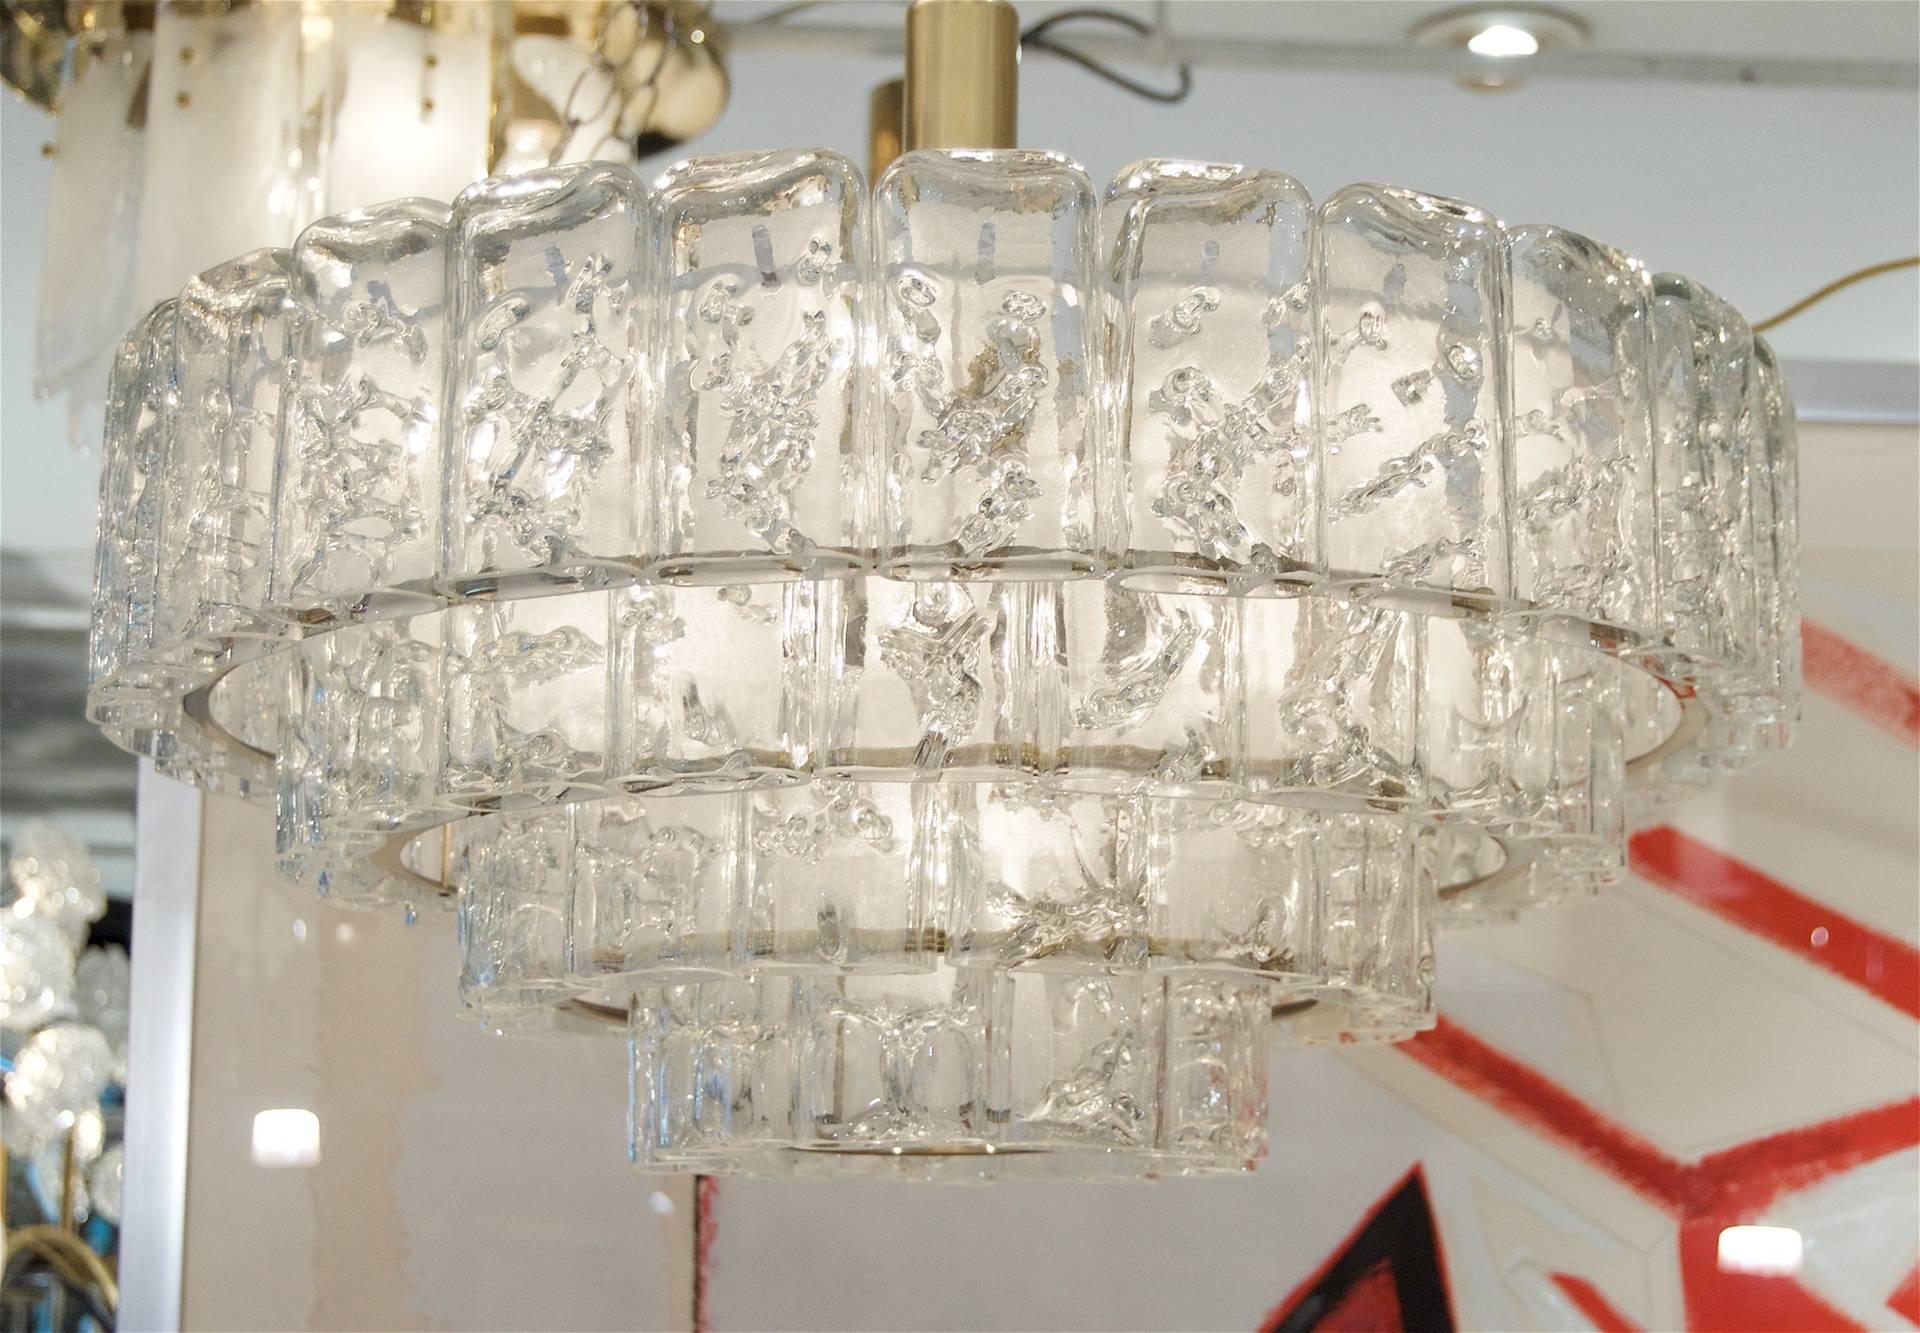 This fantastic and dramatic Doria chandelier is comprised of four tiers of individual glass pieces. The glass has the appearance of ice, each piece having internal random veining and a frosted reverse side. A thin brass ring ornaments the interior